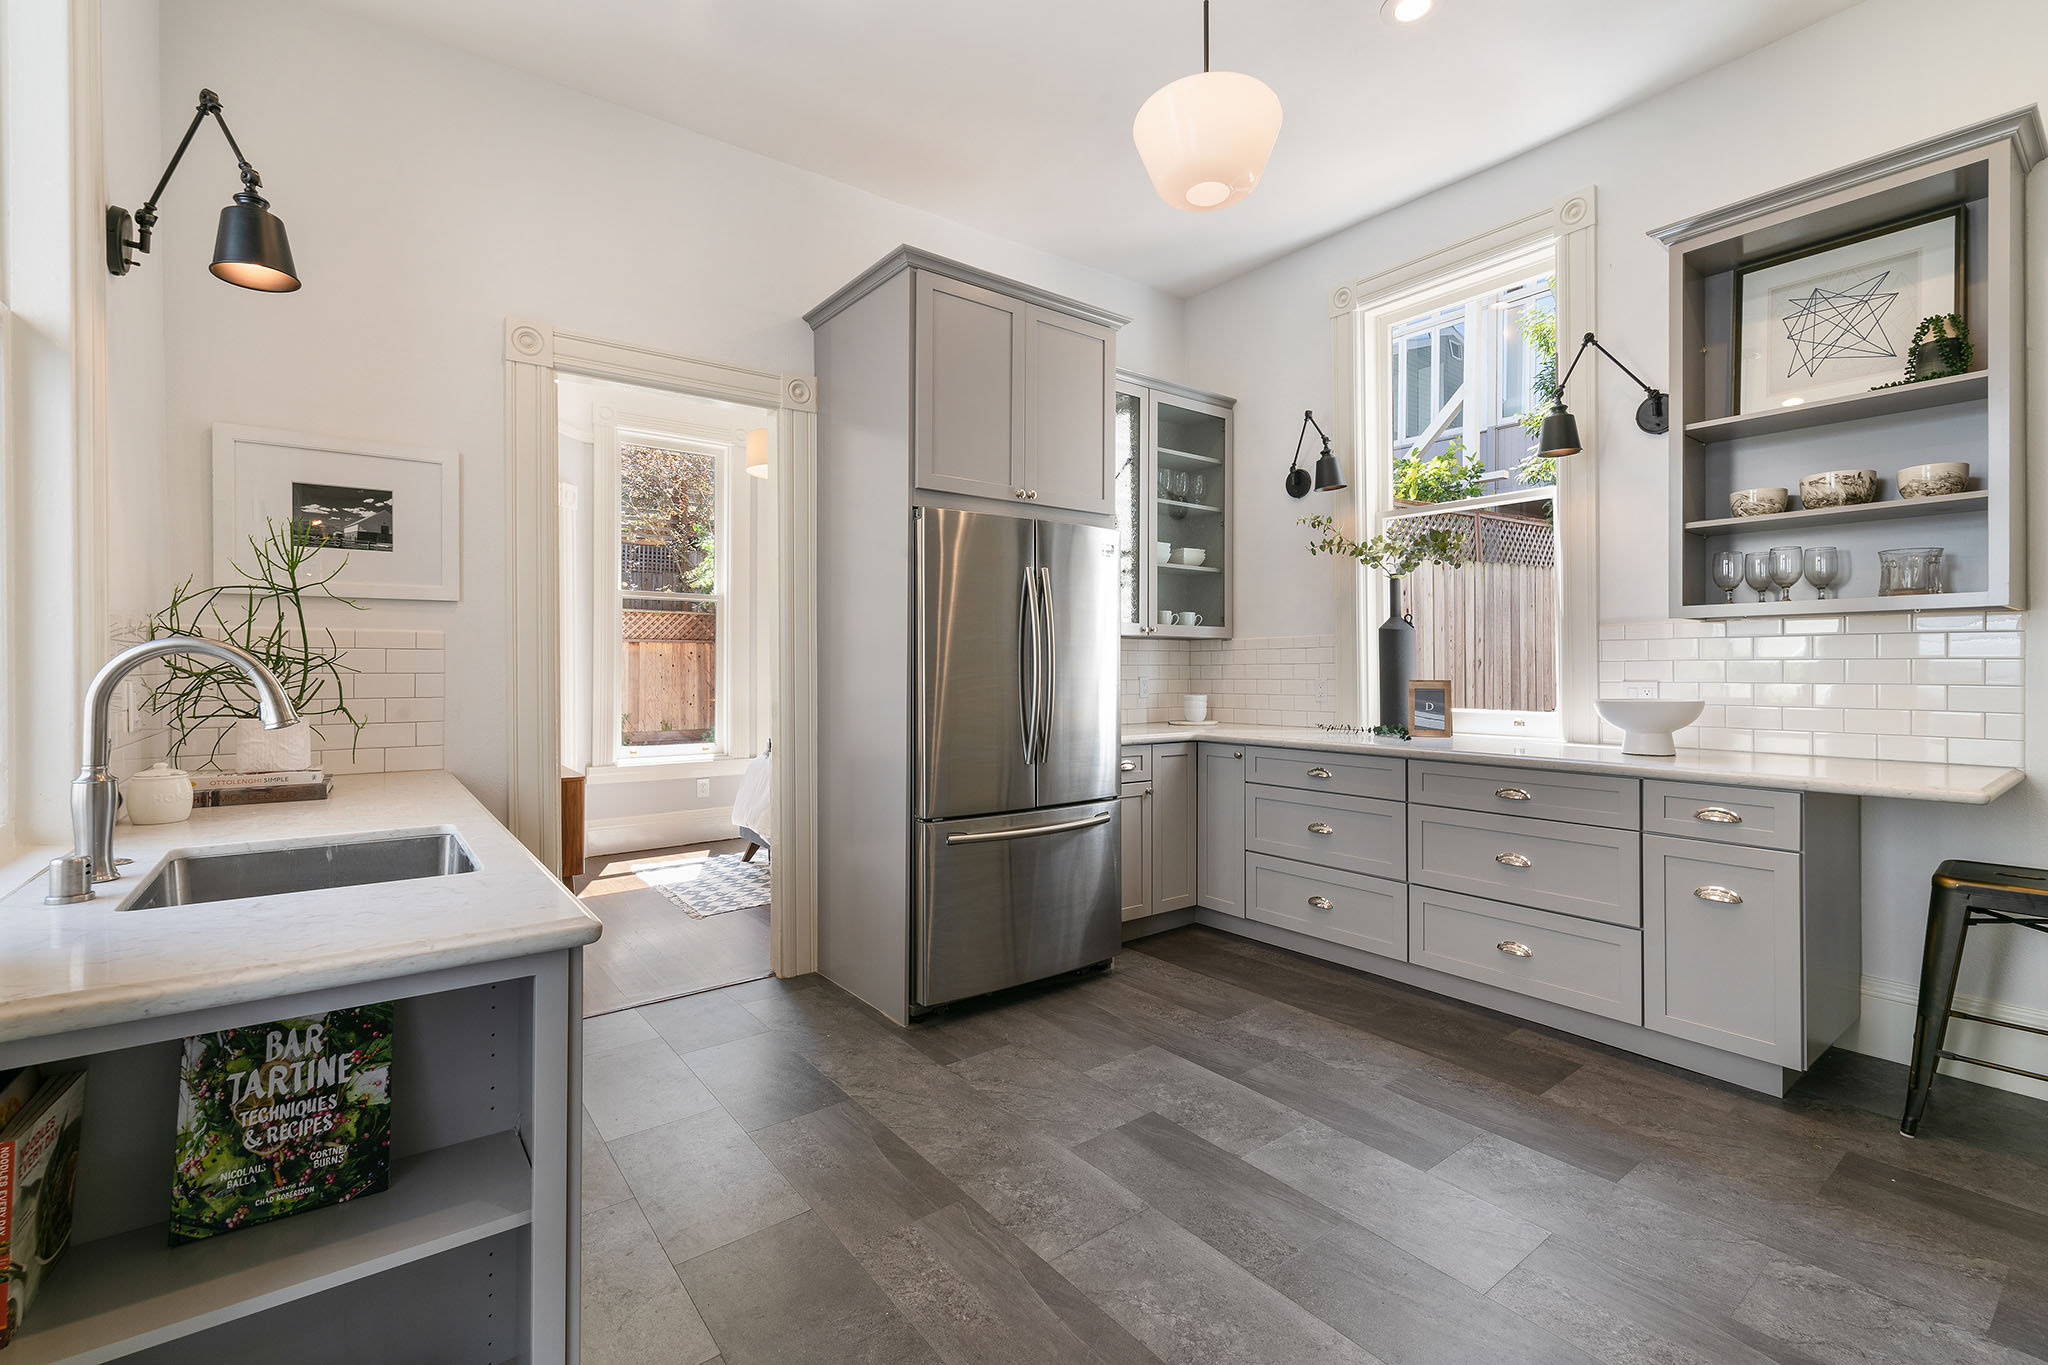 Property Photo: Kitchen, featuring grey cabinets and tiled floor